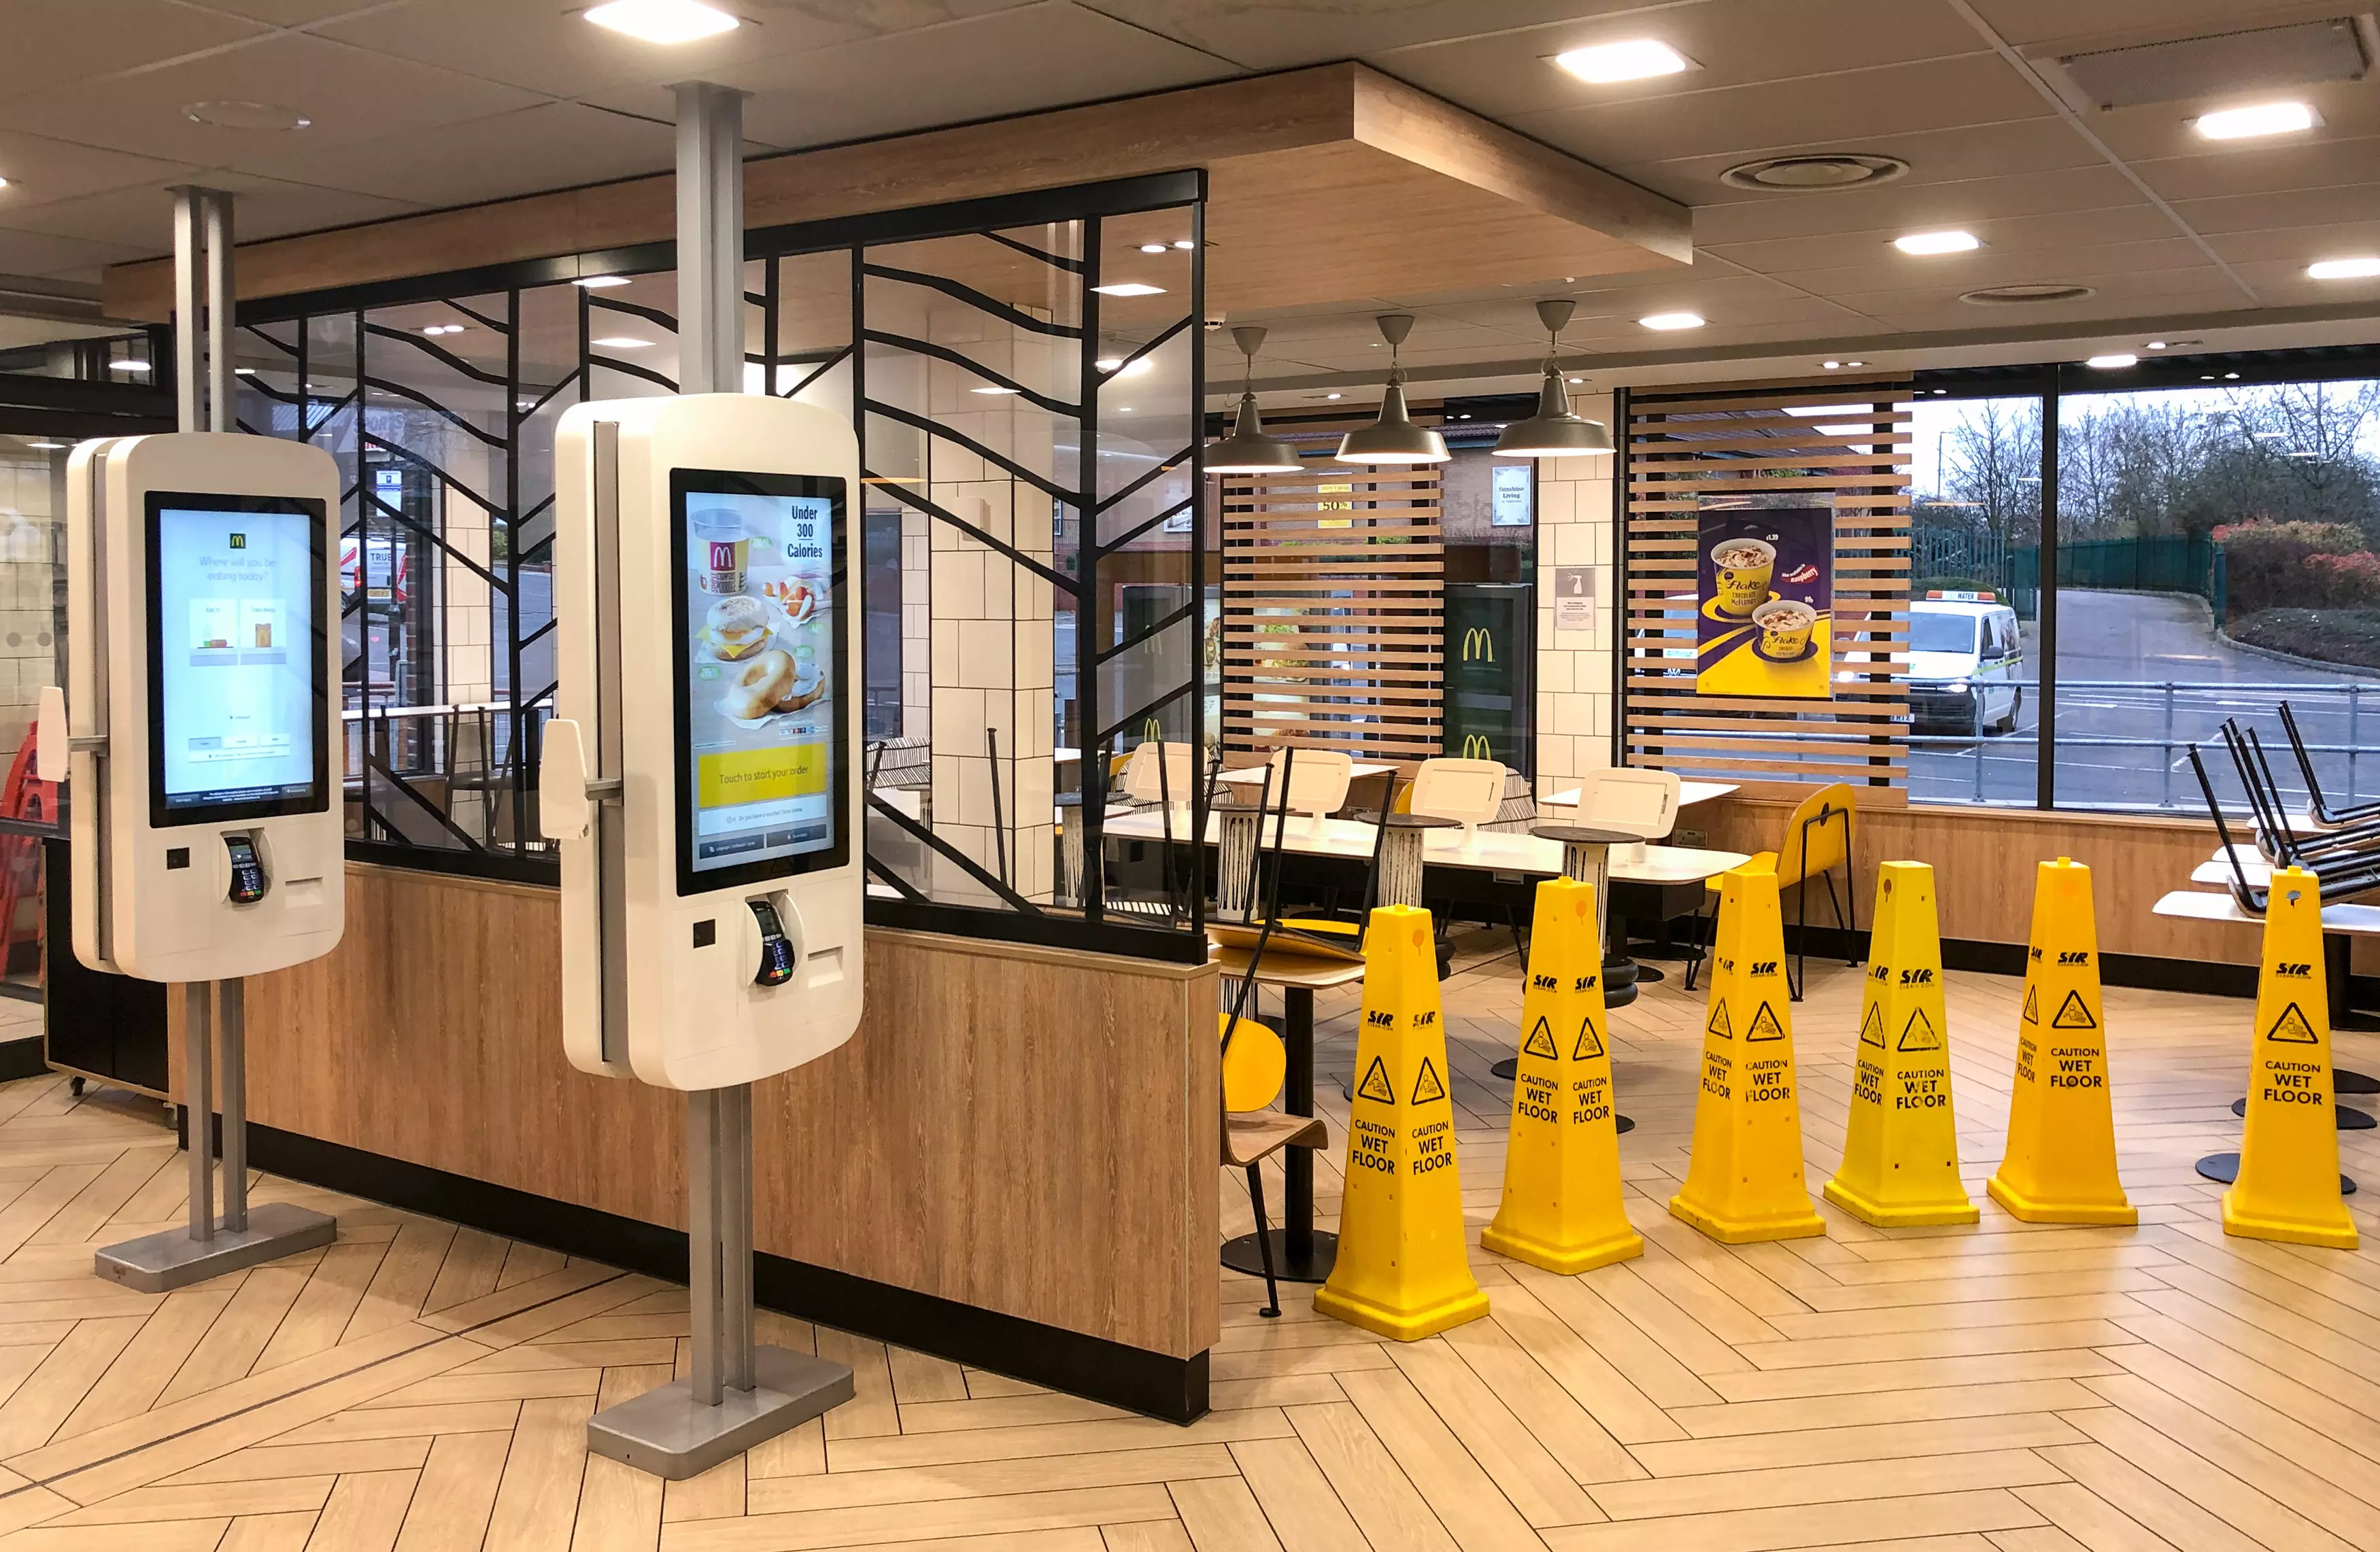 McDonald's has reopened a number of restaurants to dine in today (